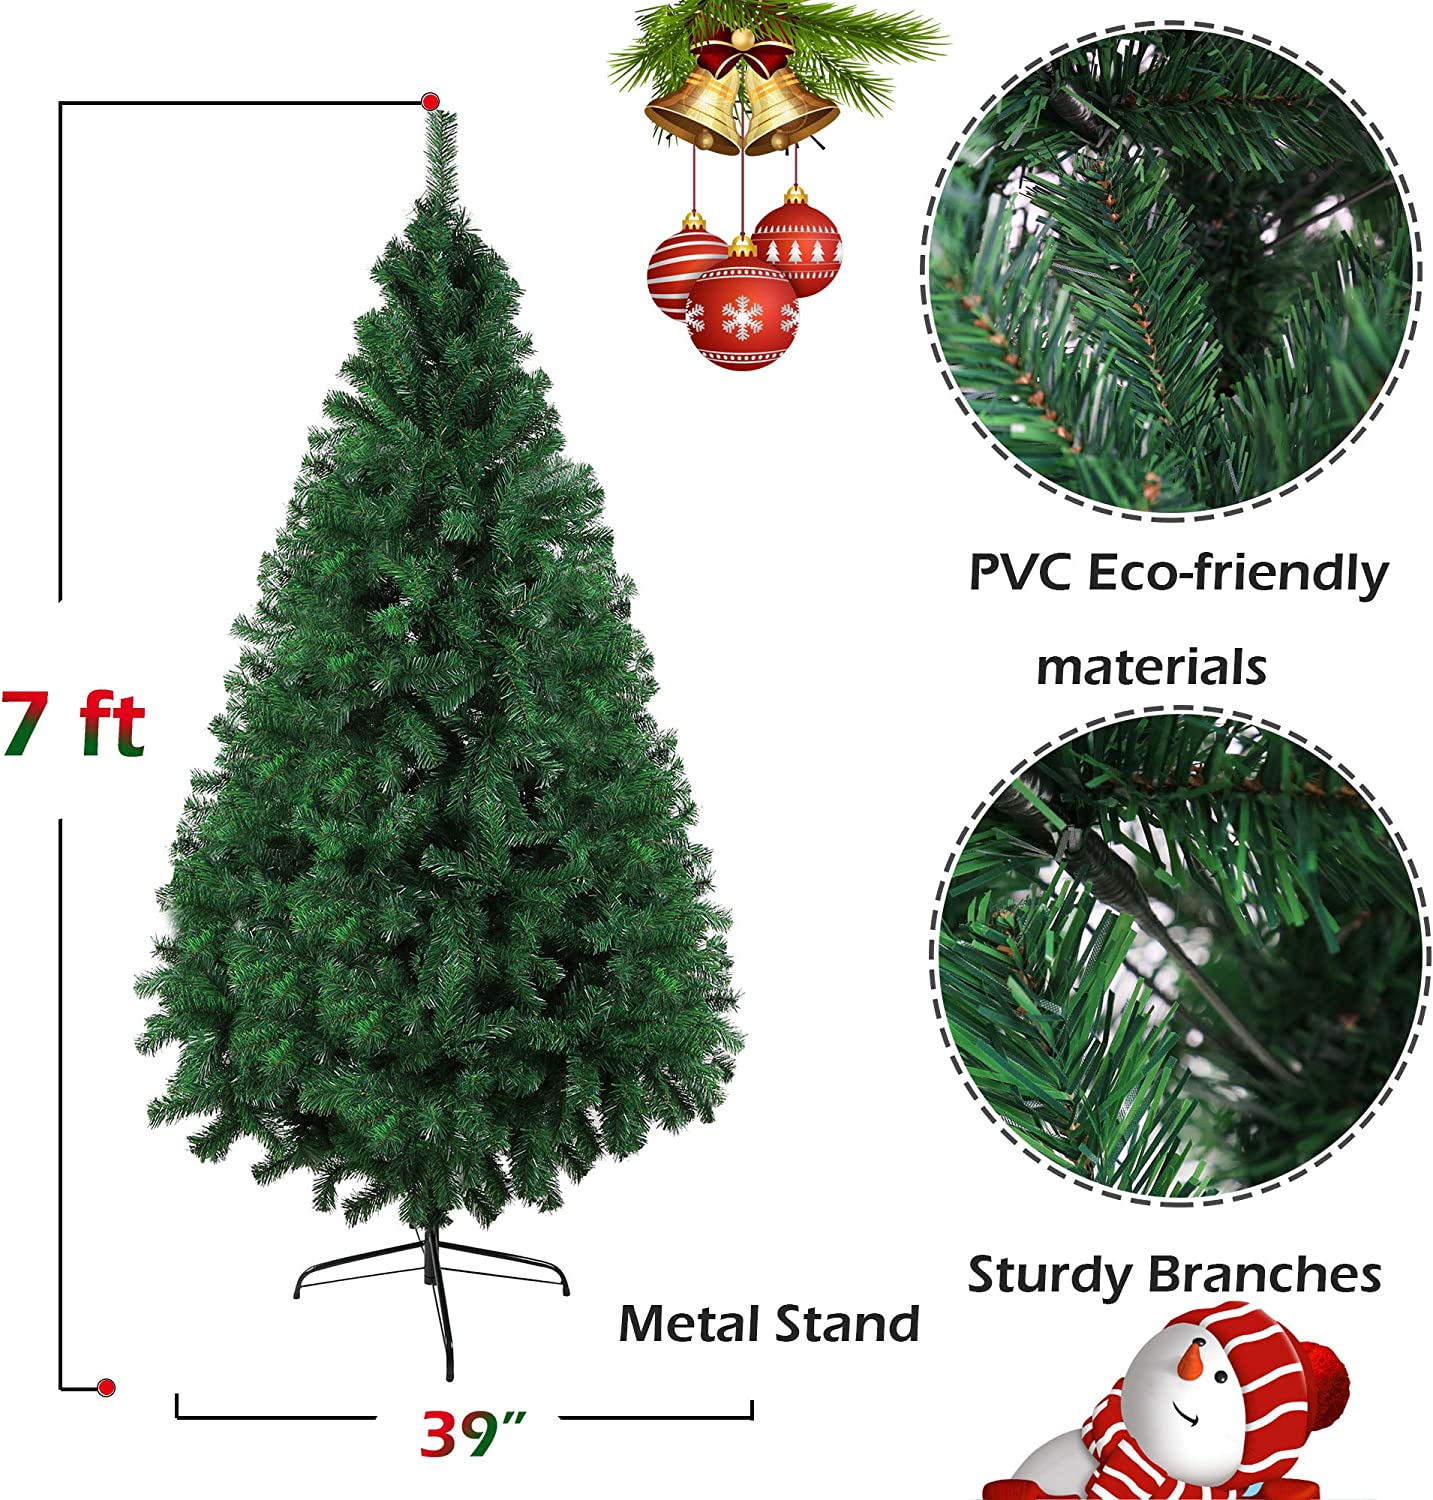 7' Christmas Pine Tree Artificial Fake Xmas Tree with Solid Metal Stand and Decoration for Festival Party Holiday, Green